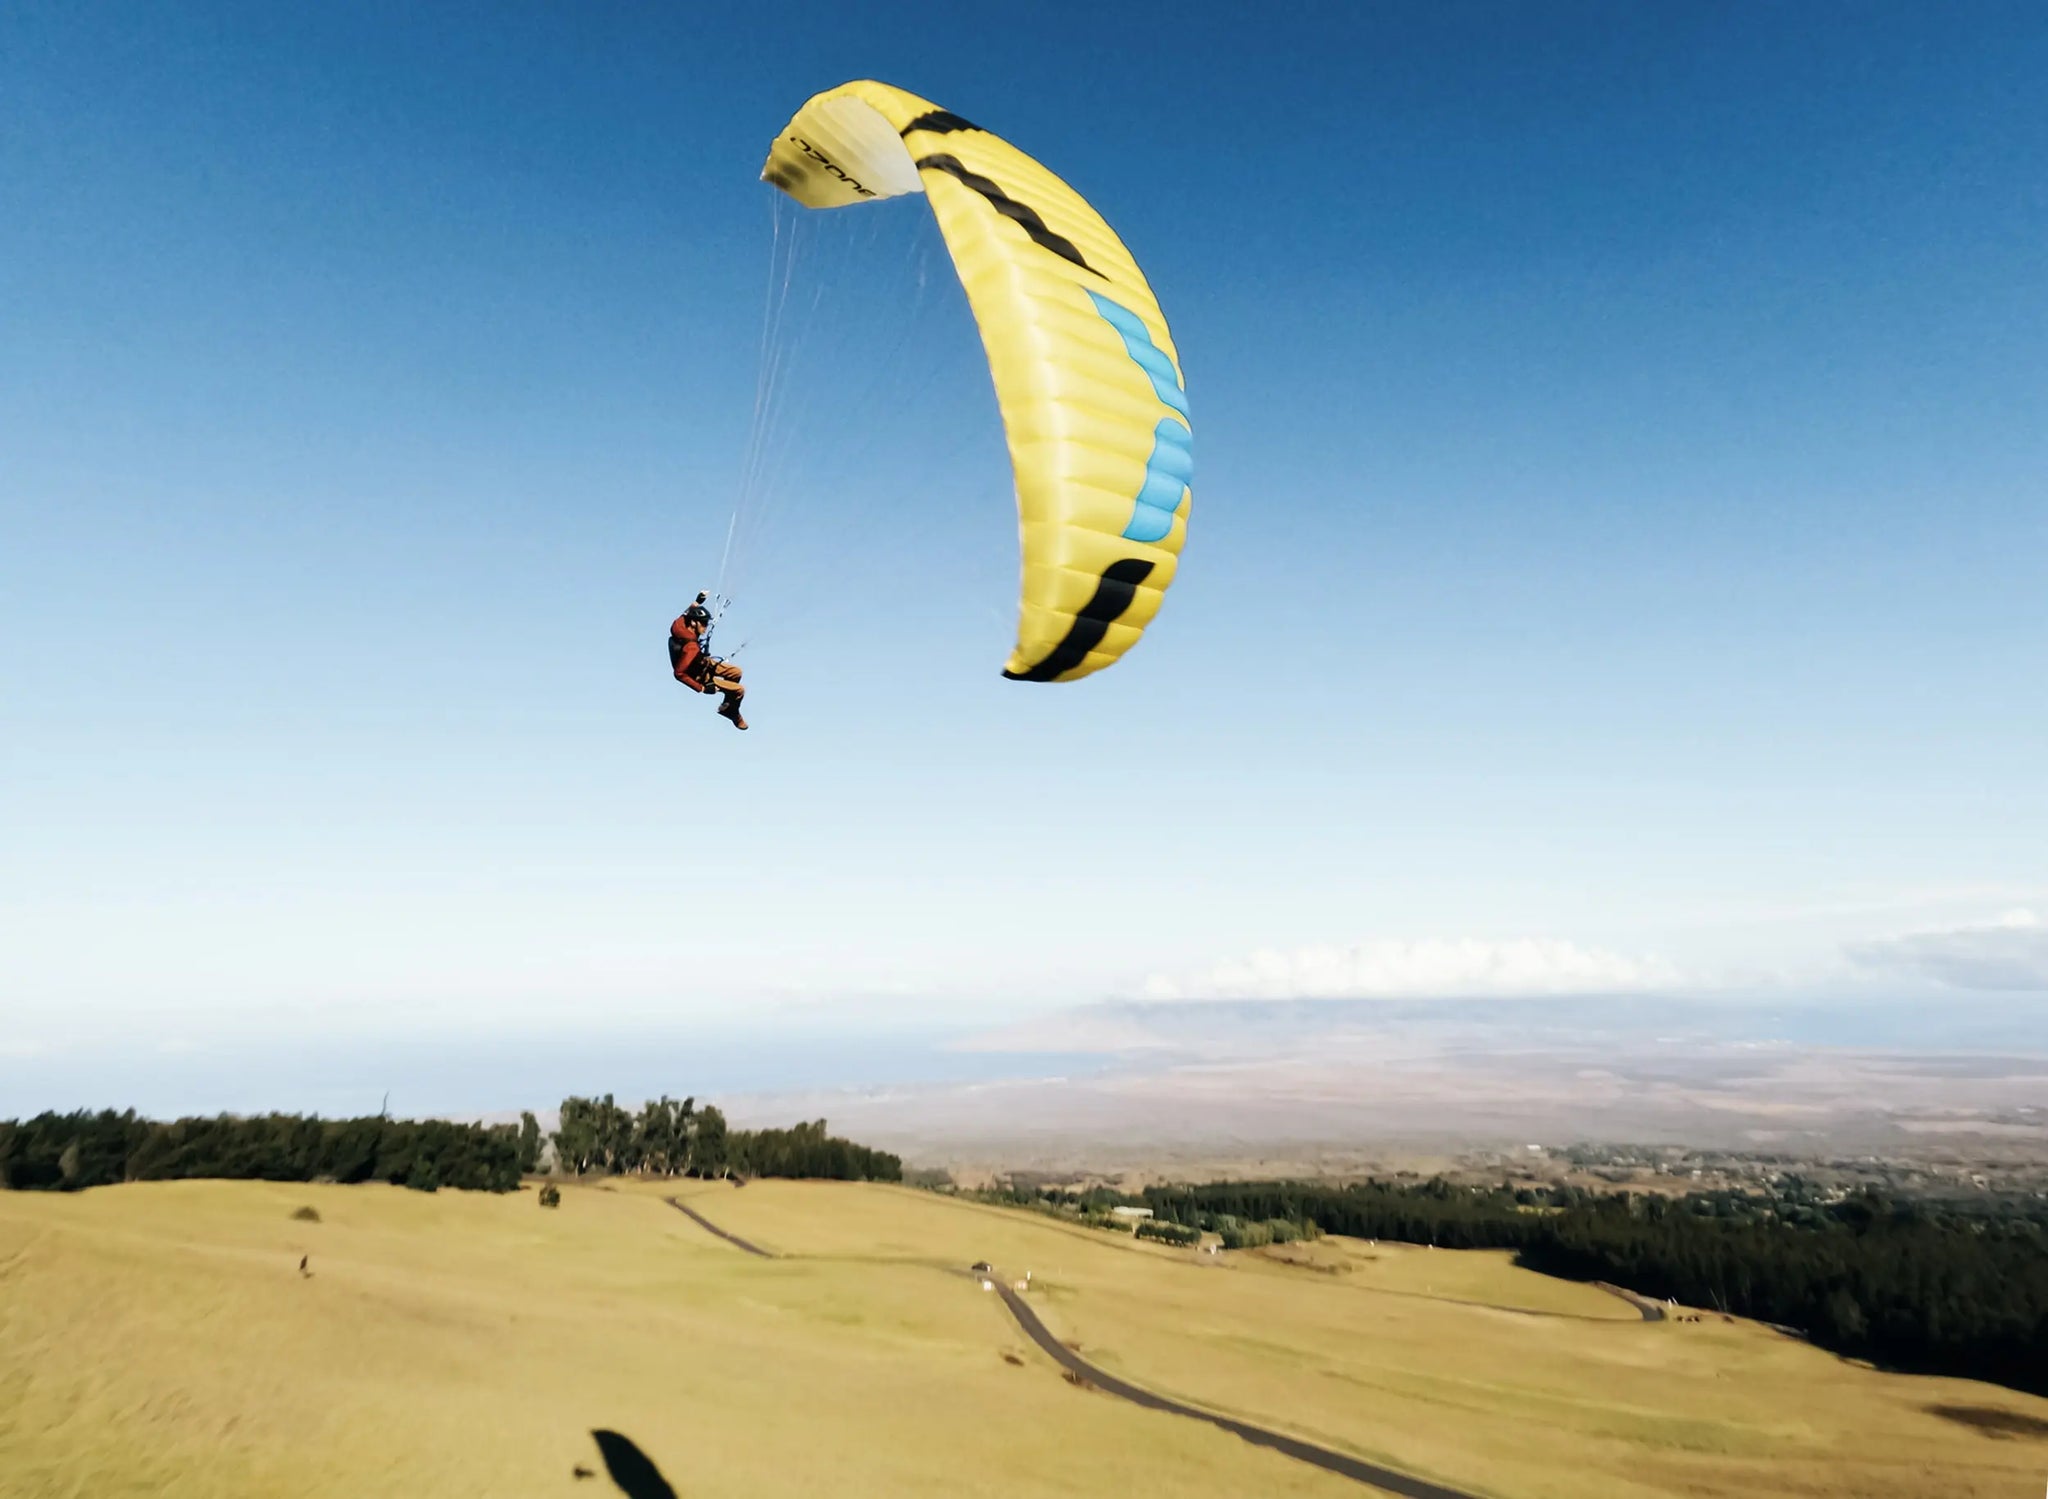 Managing Fear During a Paragliding Flight: Be Confident with Your Equipment